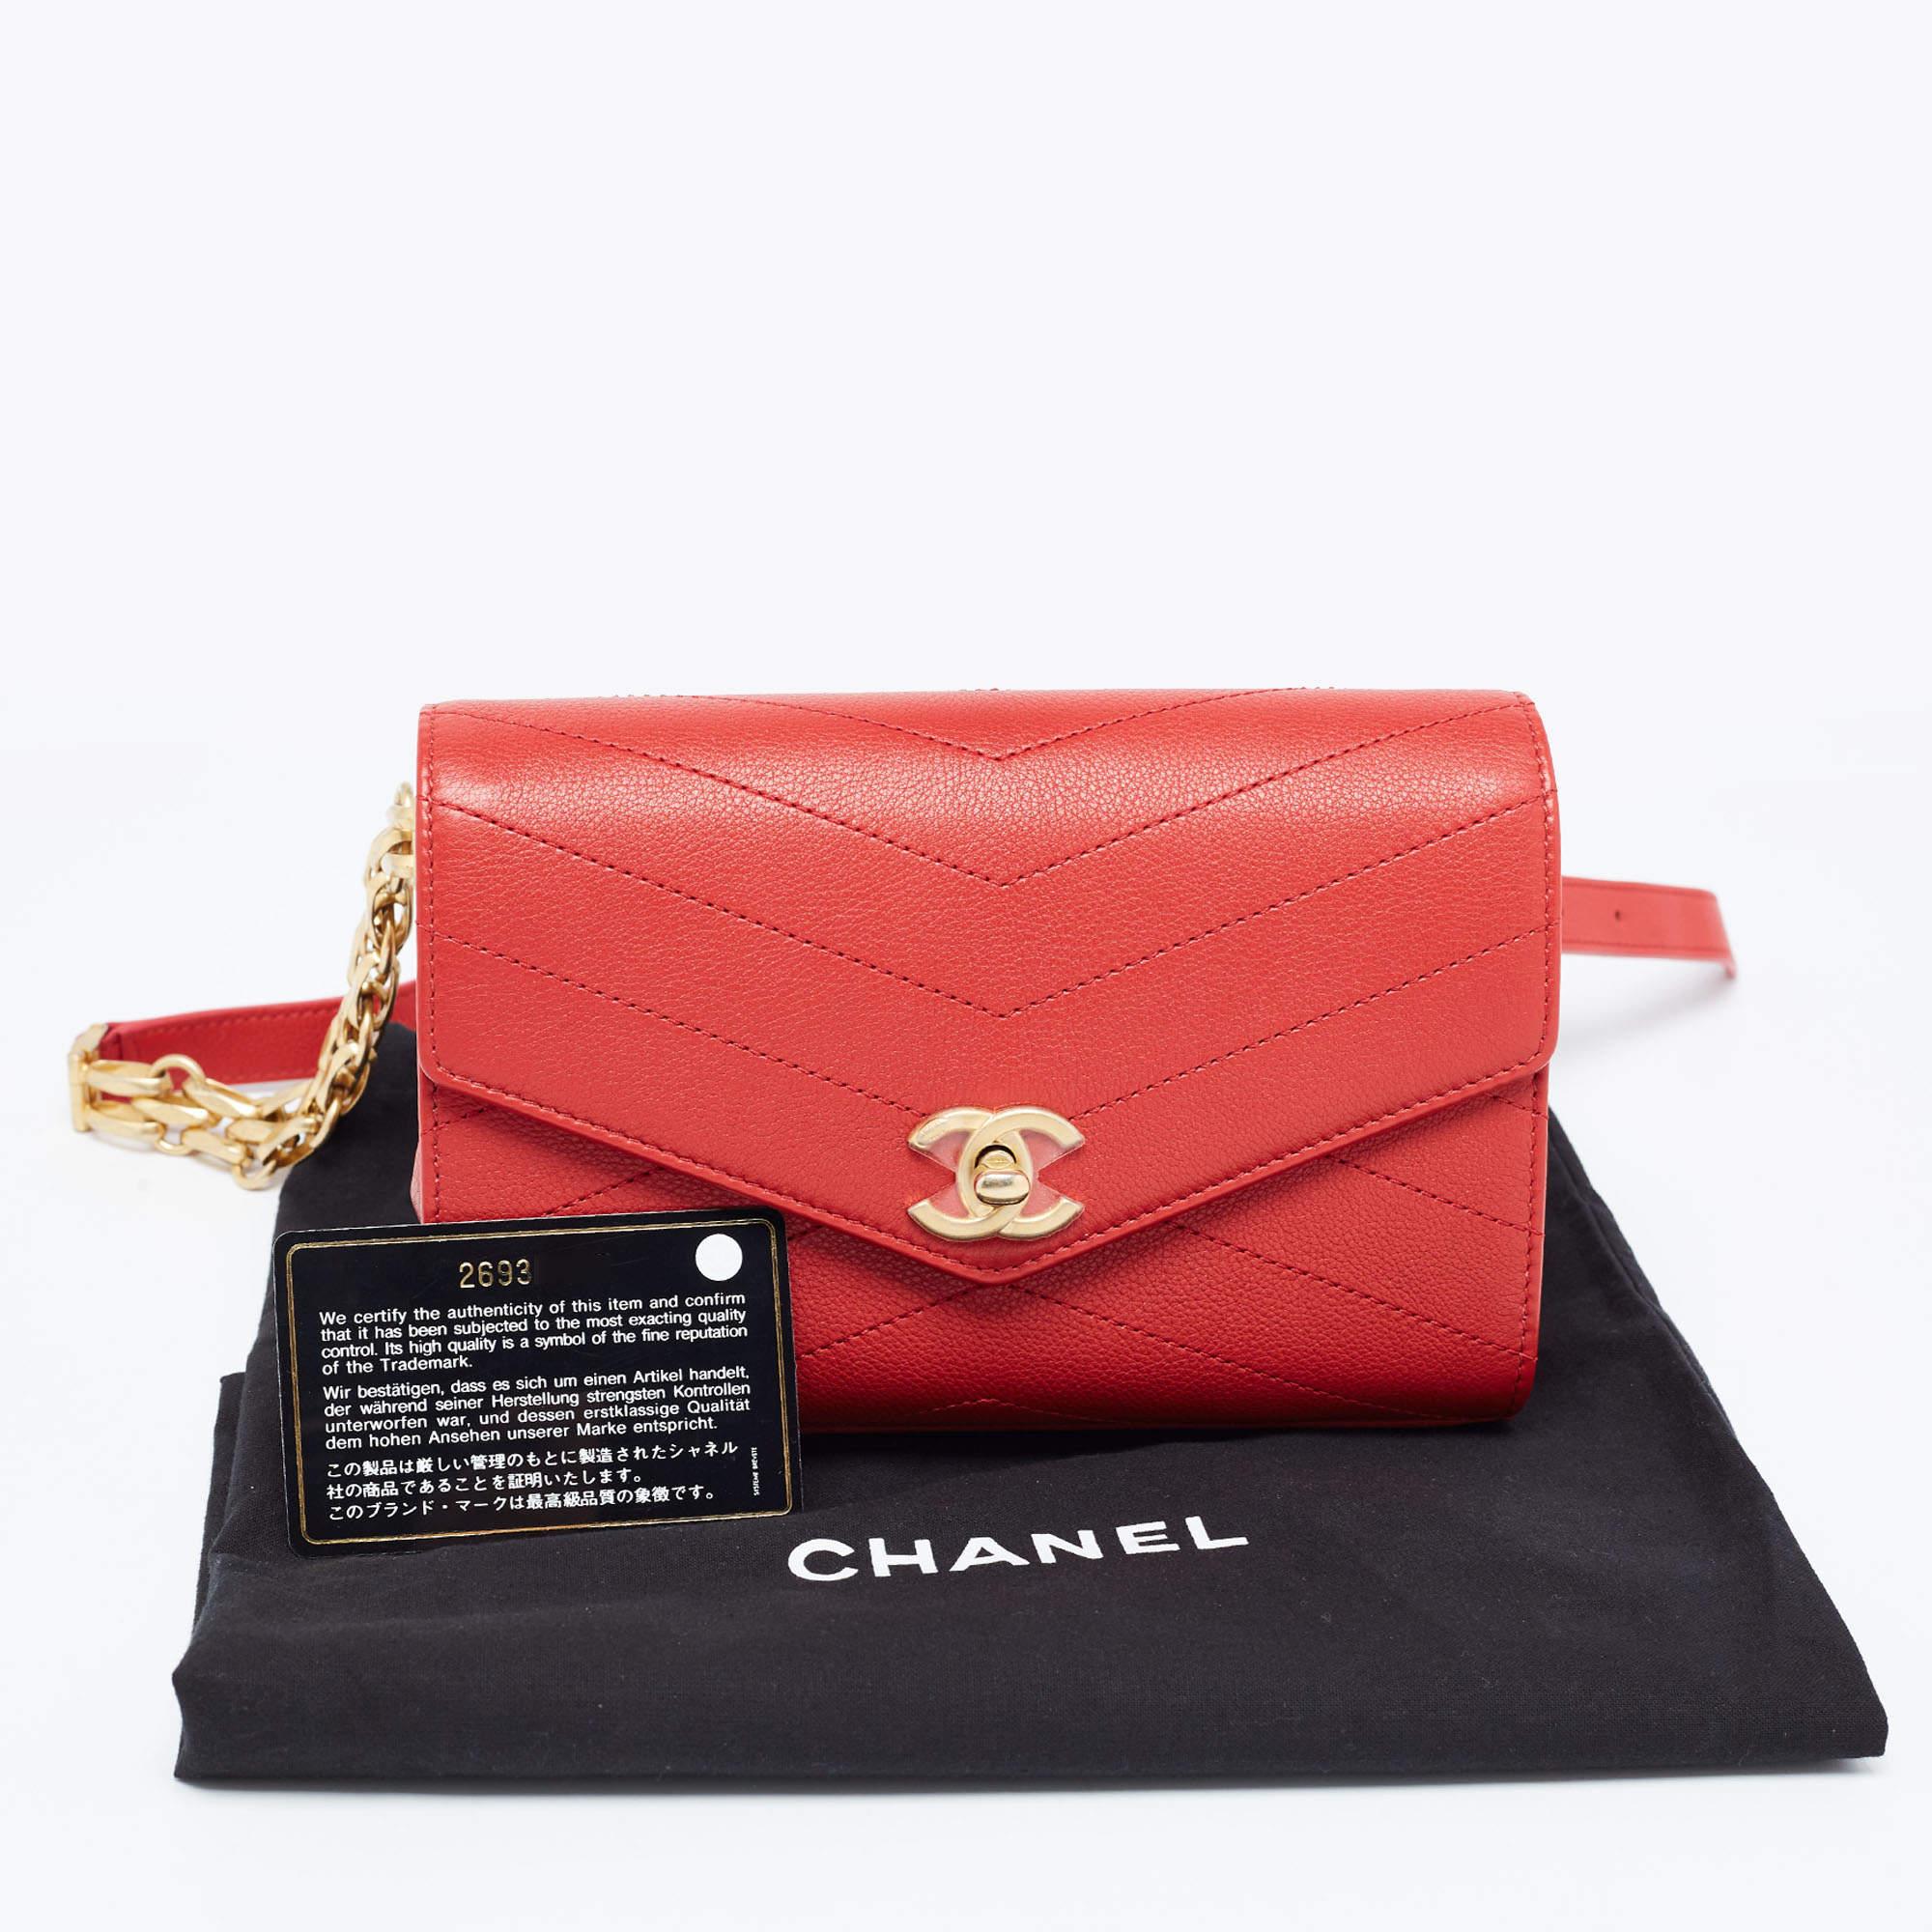 Chanel Red Chevron Leather Coco Waist Belt Bag For Sale 8